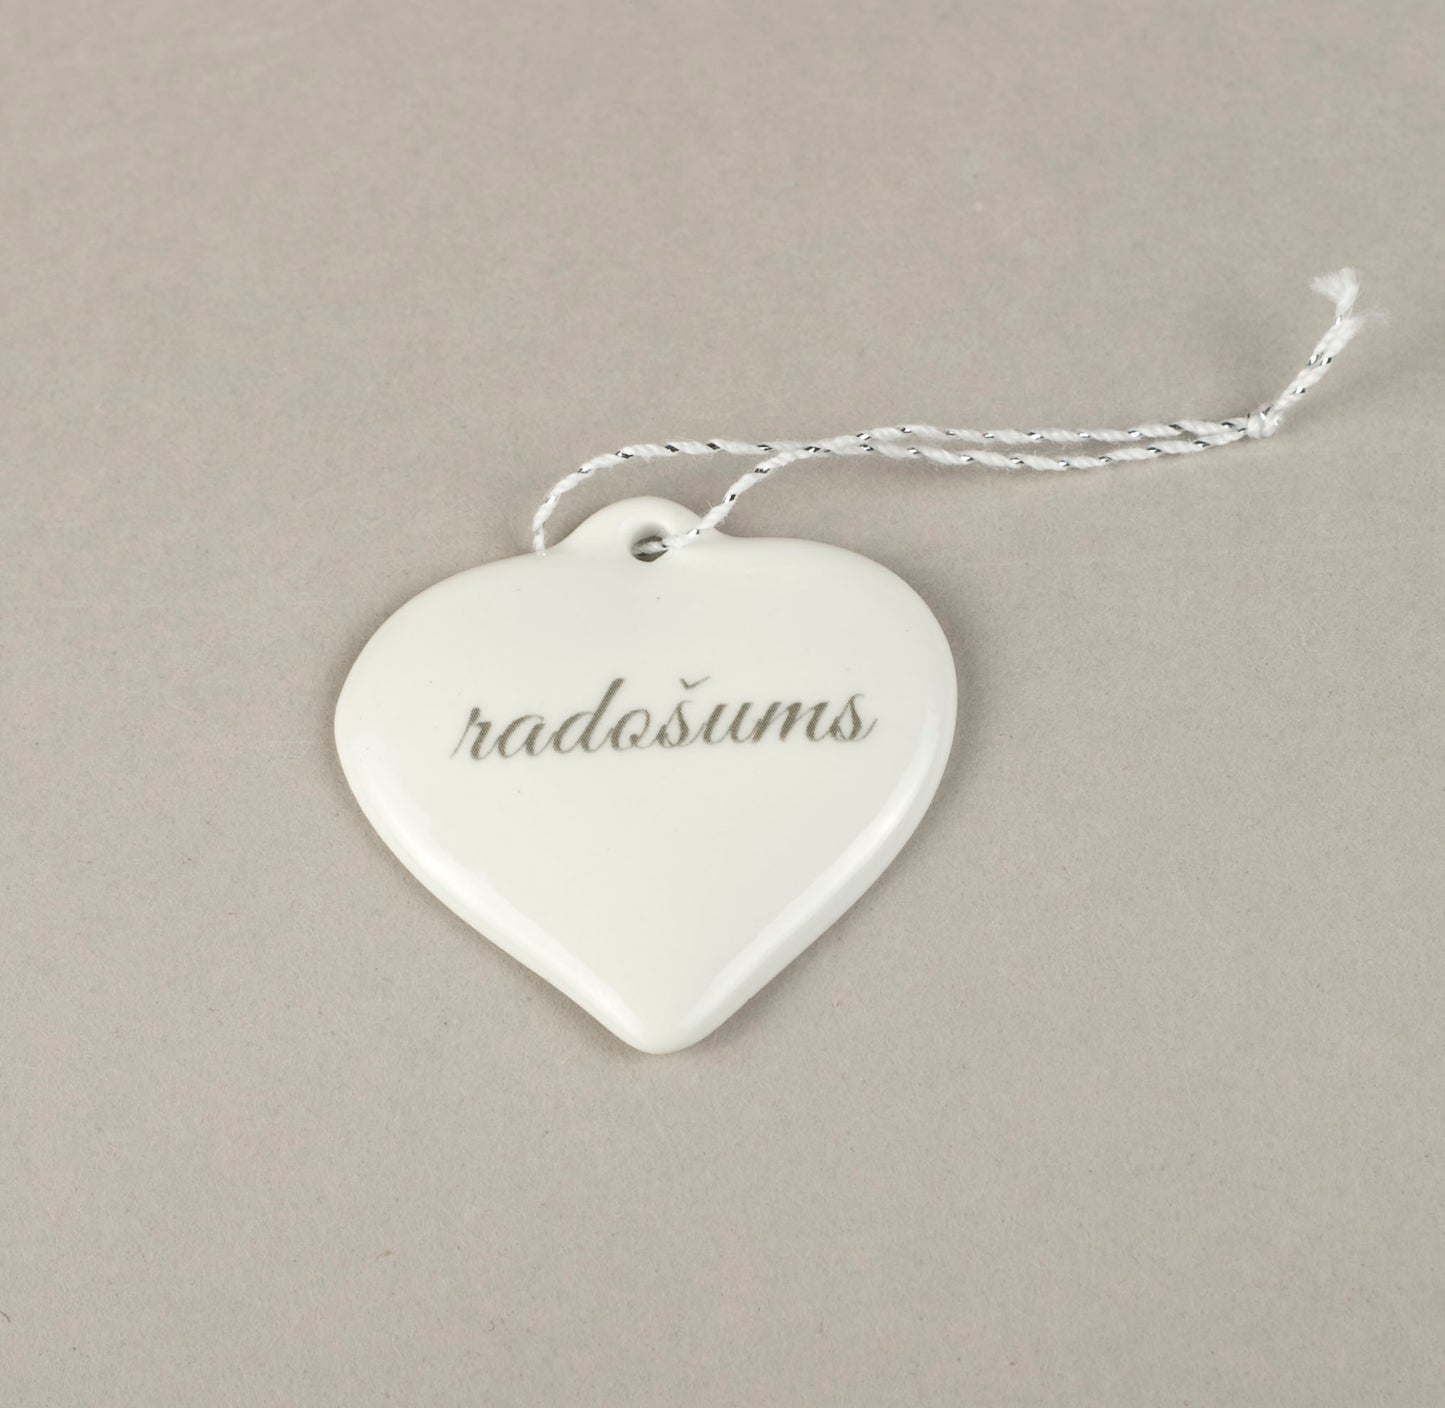 Porcelain Decorations For Christmas Trees - Heart With Print